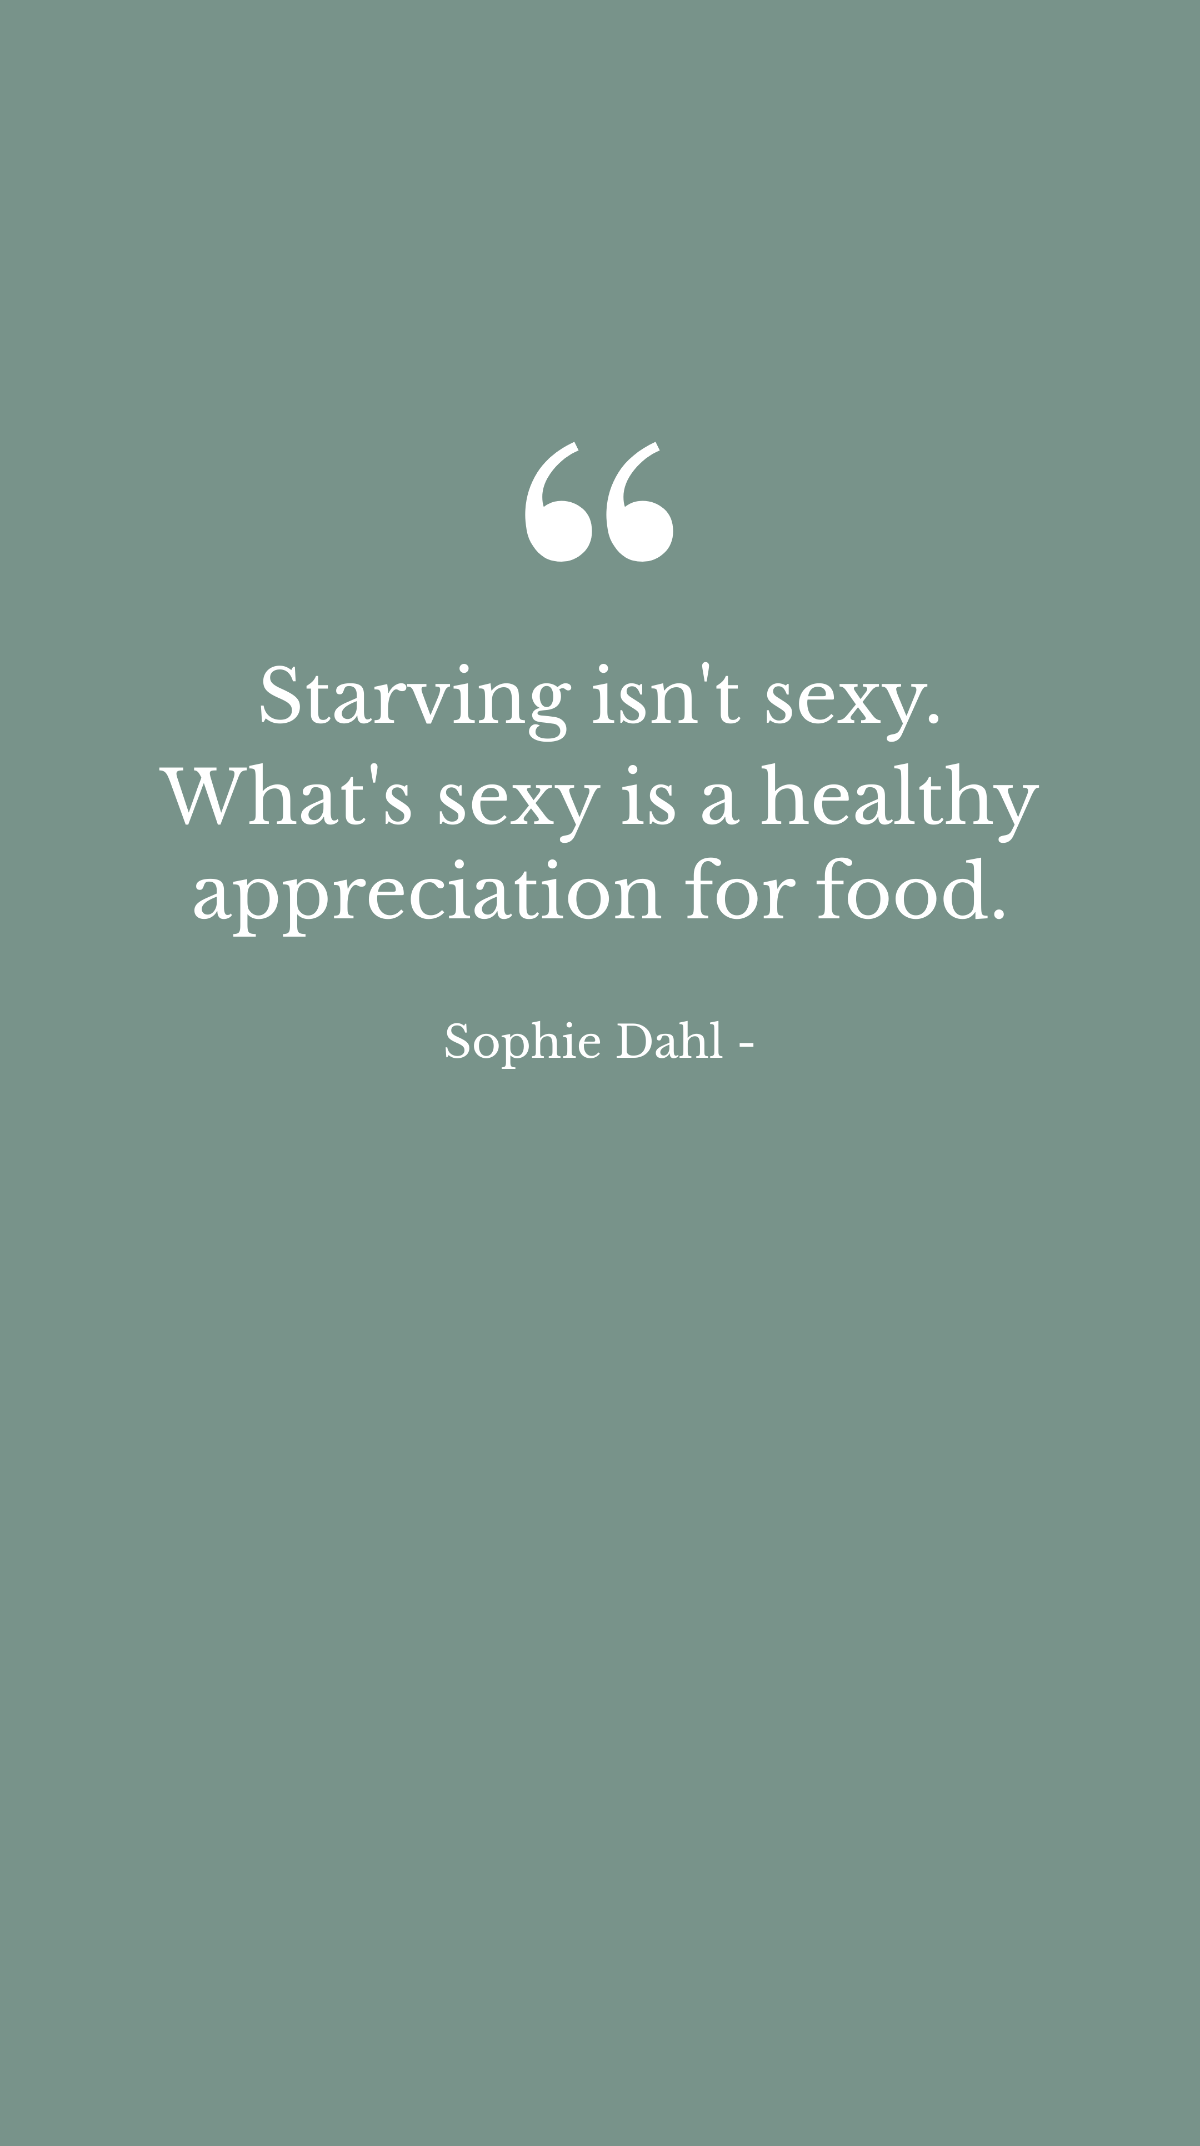 Free Sophie Dahl - Starving isn't sexy. What's sexy is a healthy appreciation for food. Template